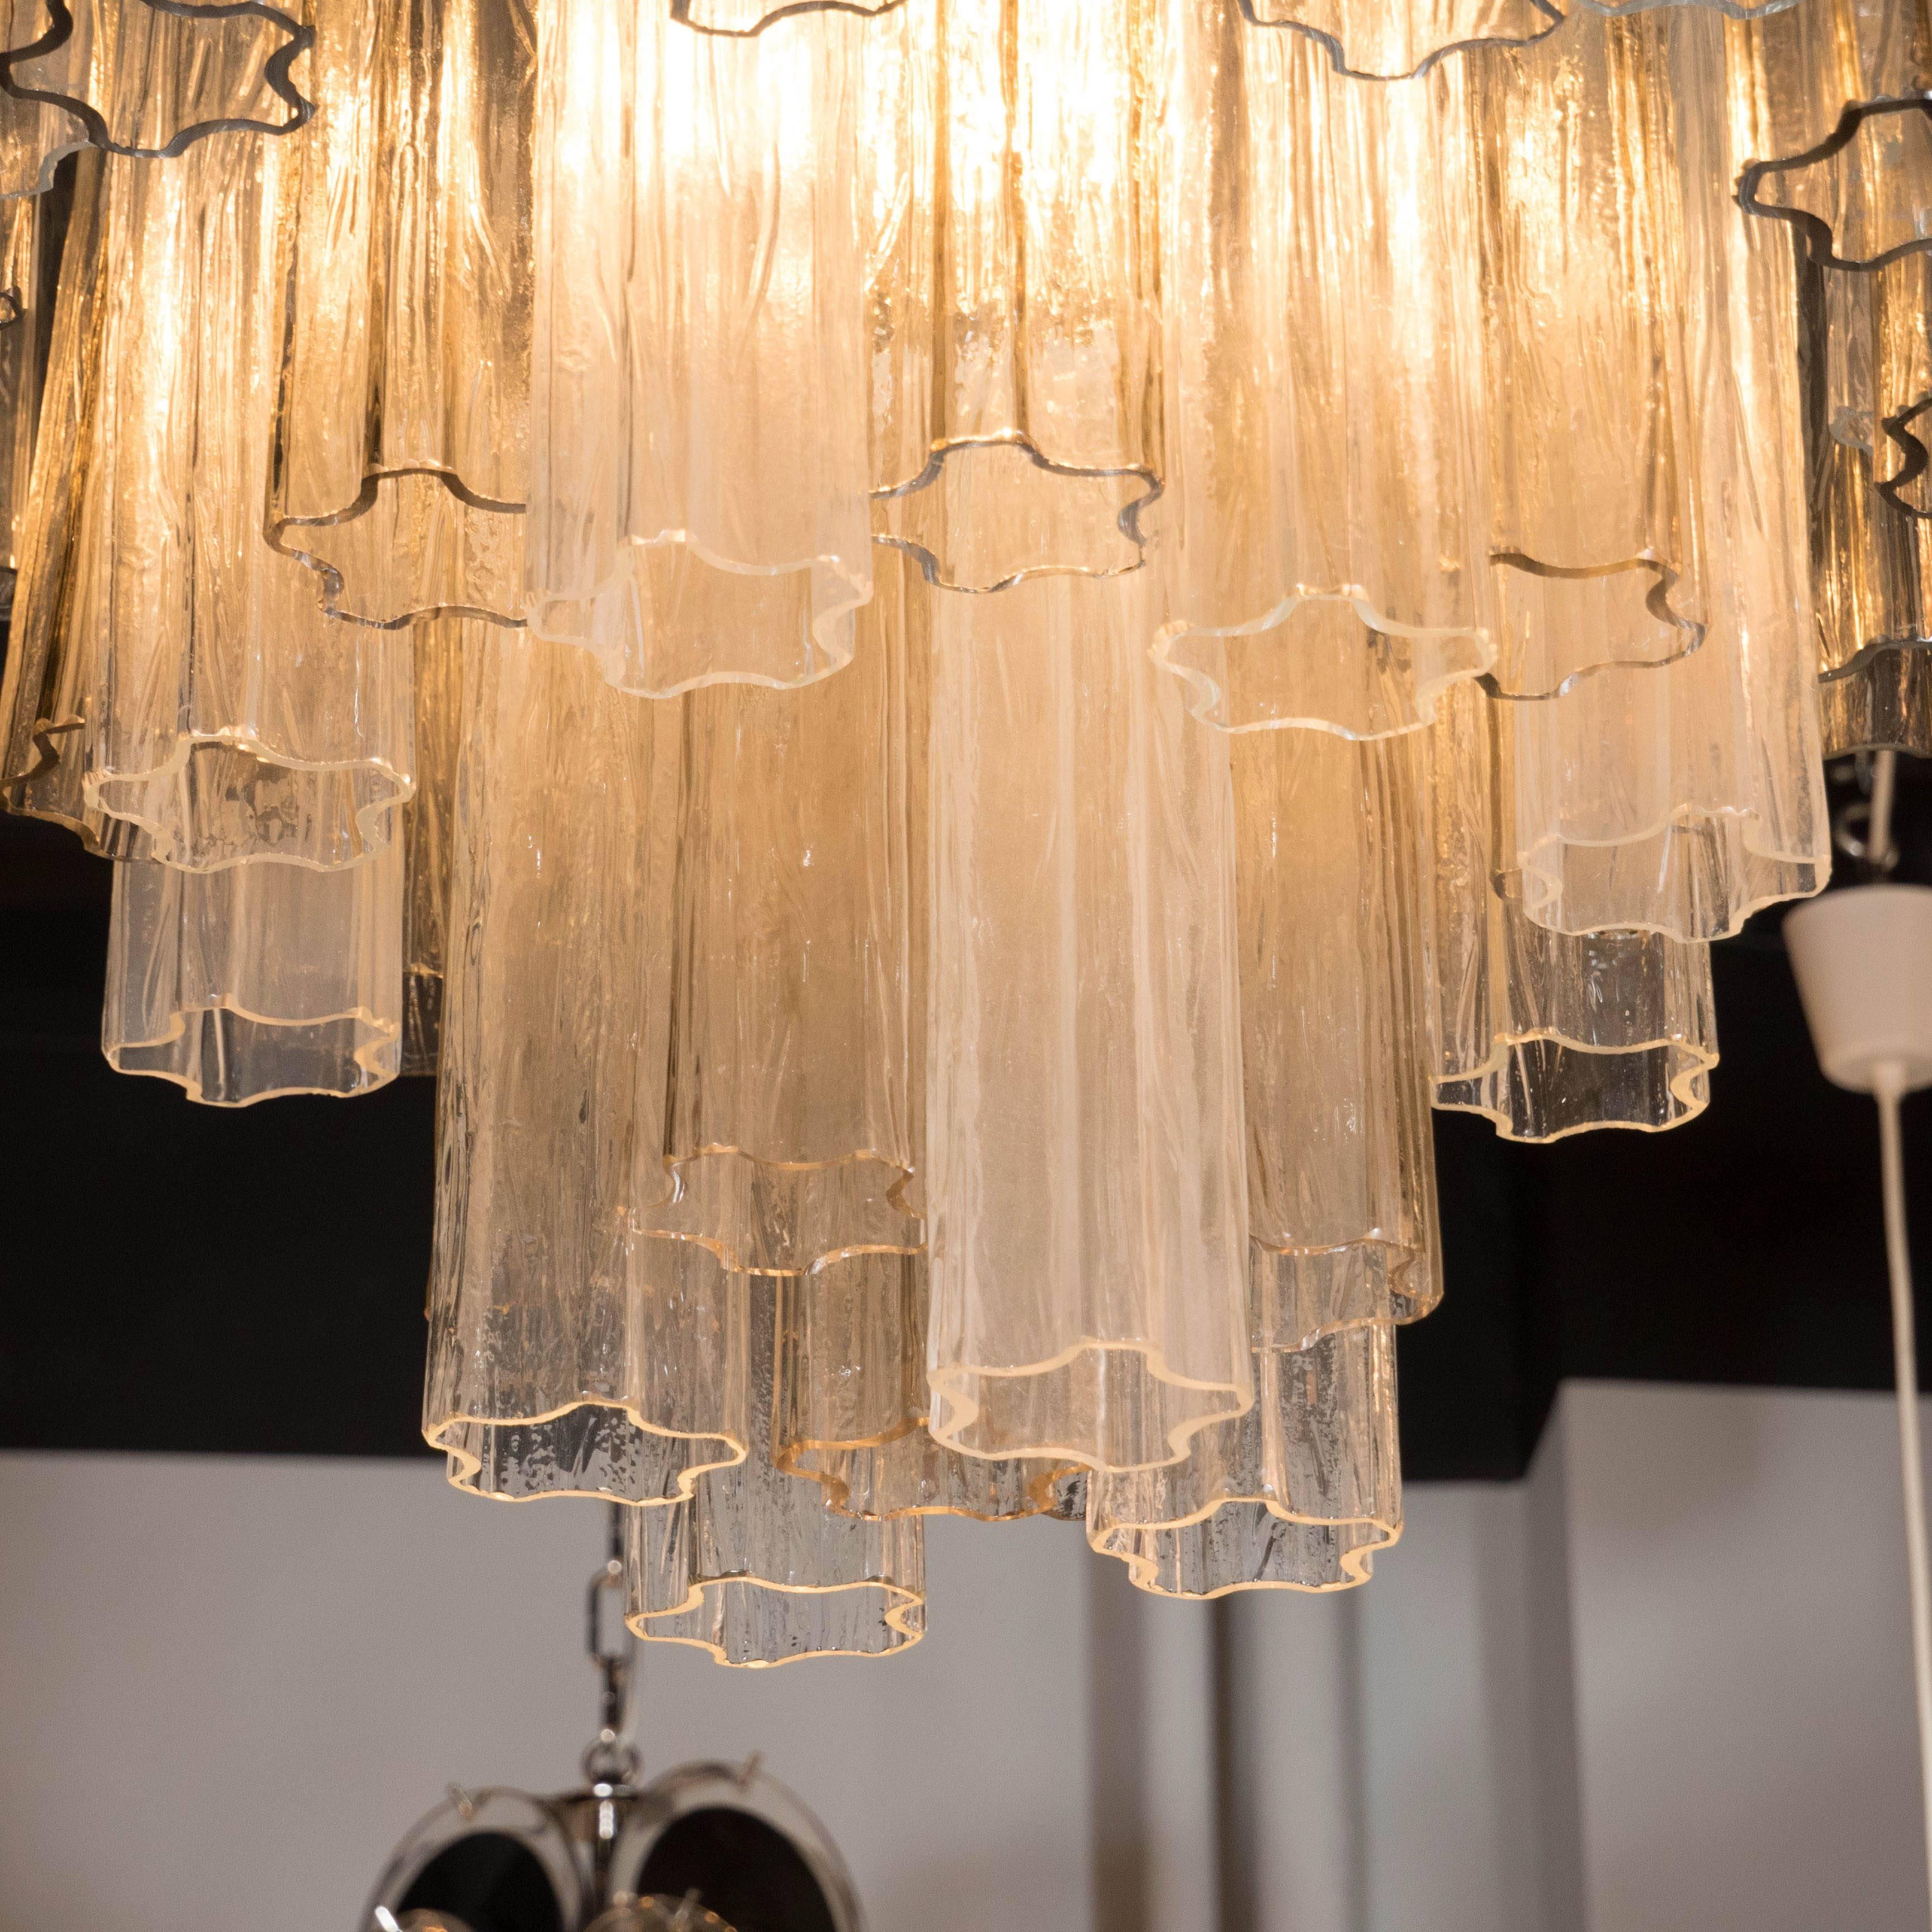 Mid-Century Modern Murano Three-Tier Smoked and Clear Tronchi Chandelier with Chrome Fittings